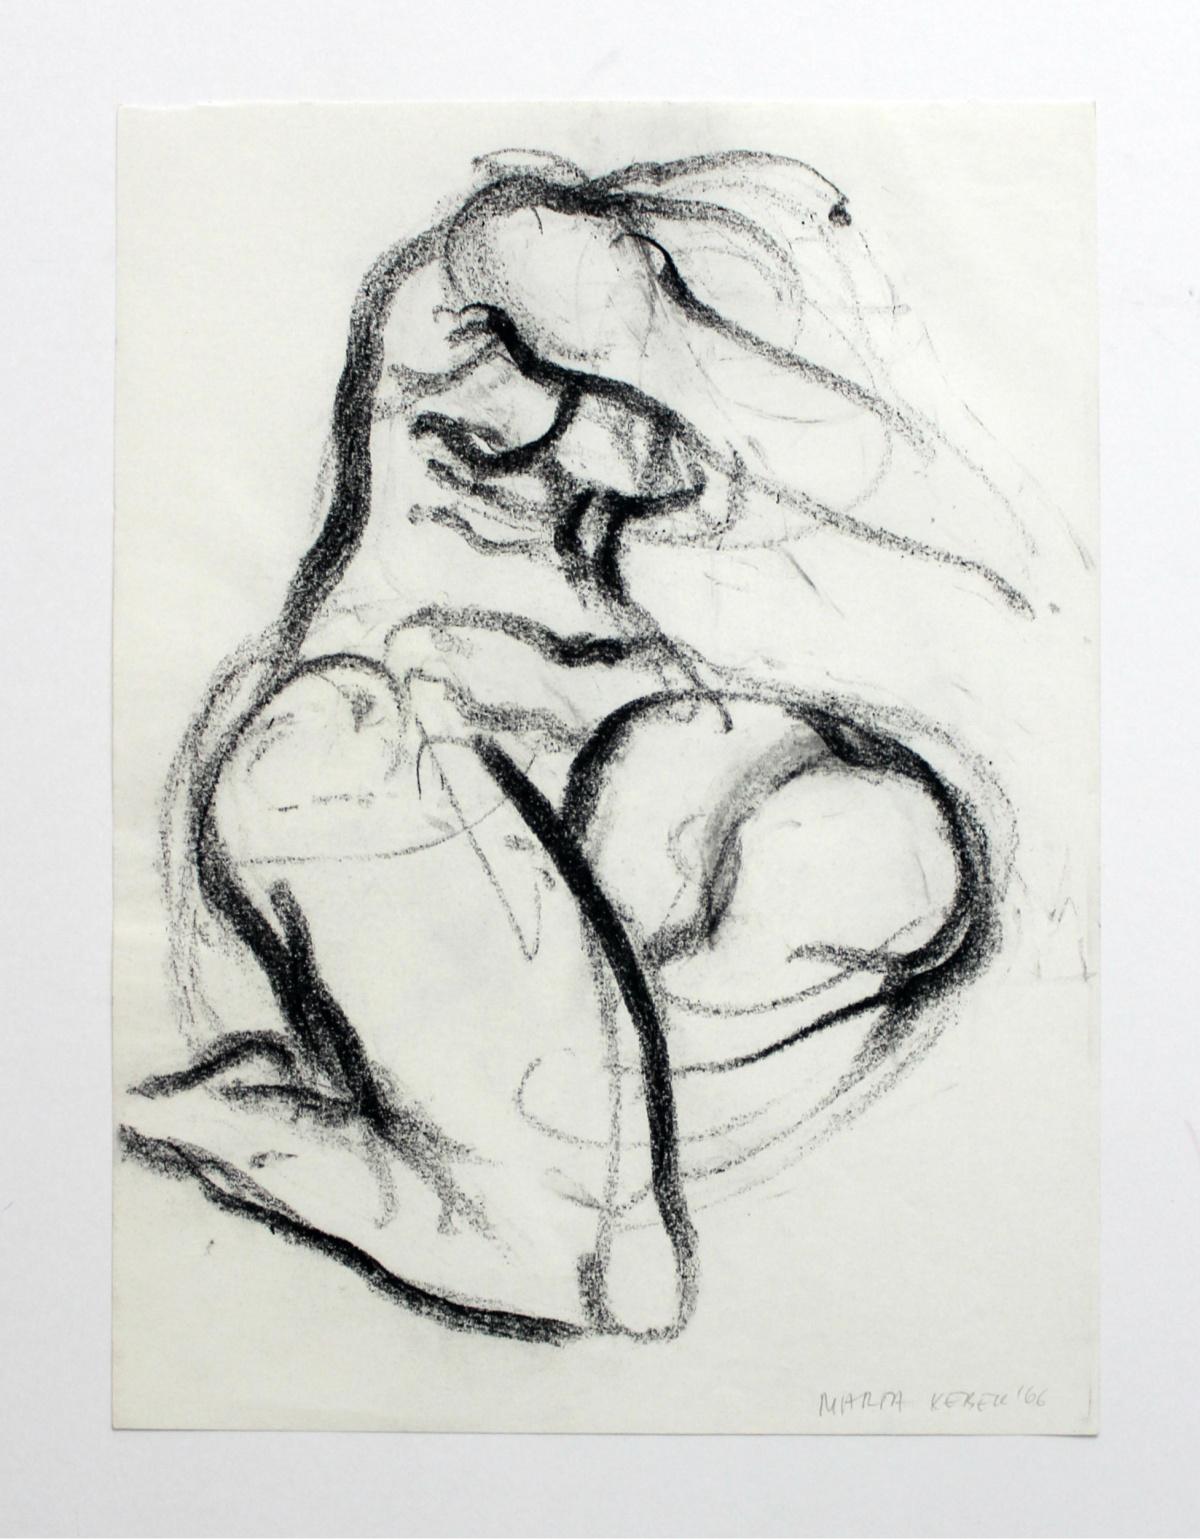 Nude - XXI Century, Contemporary Charcoal Figurative Drawing, Sitting Female - Art by Marta Łebek